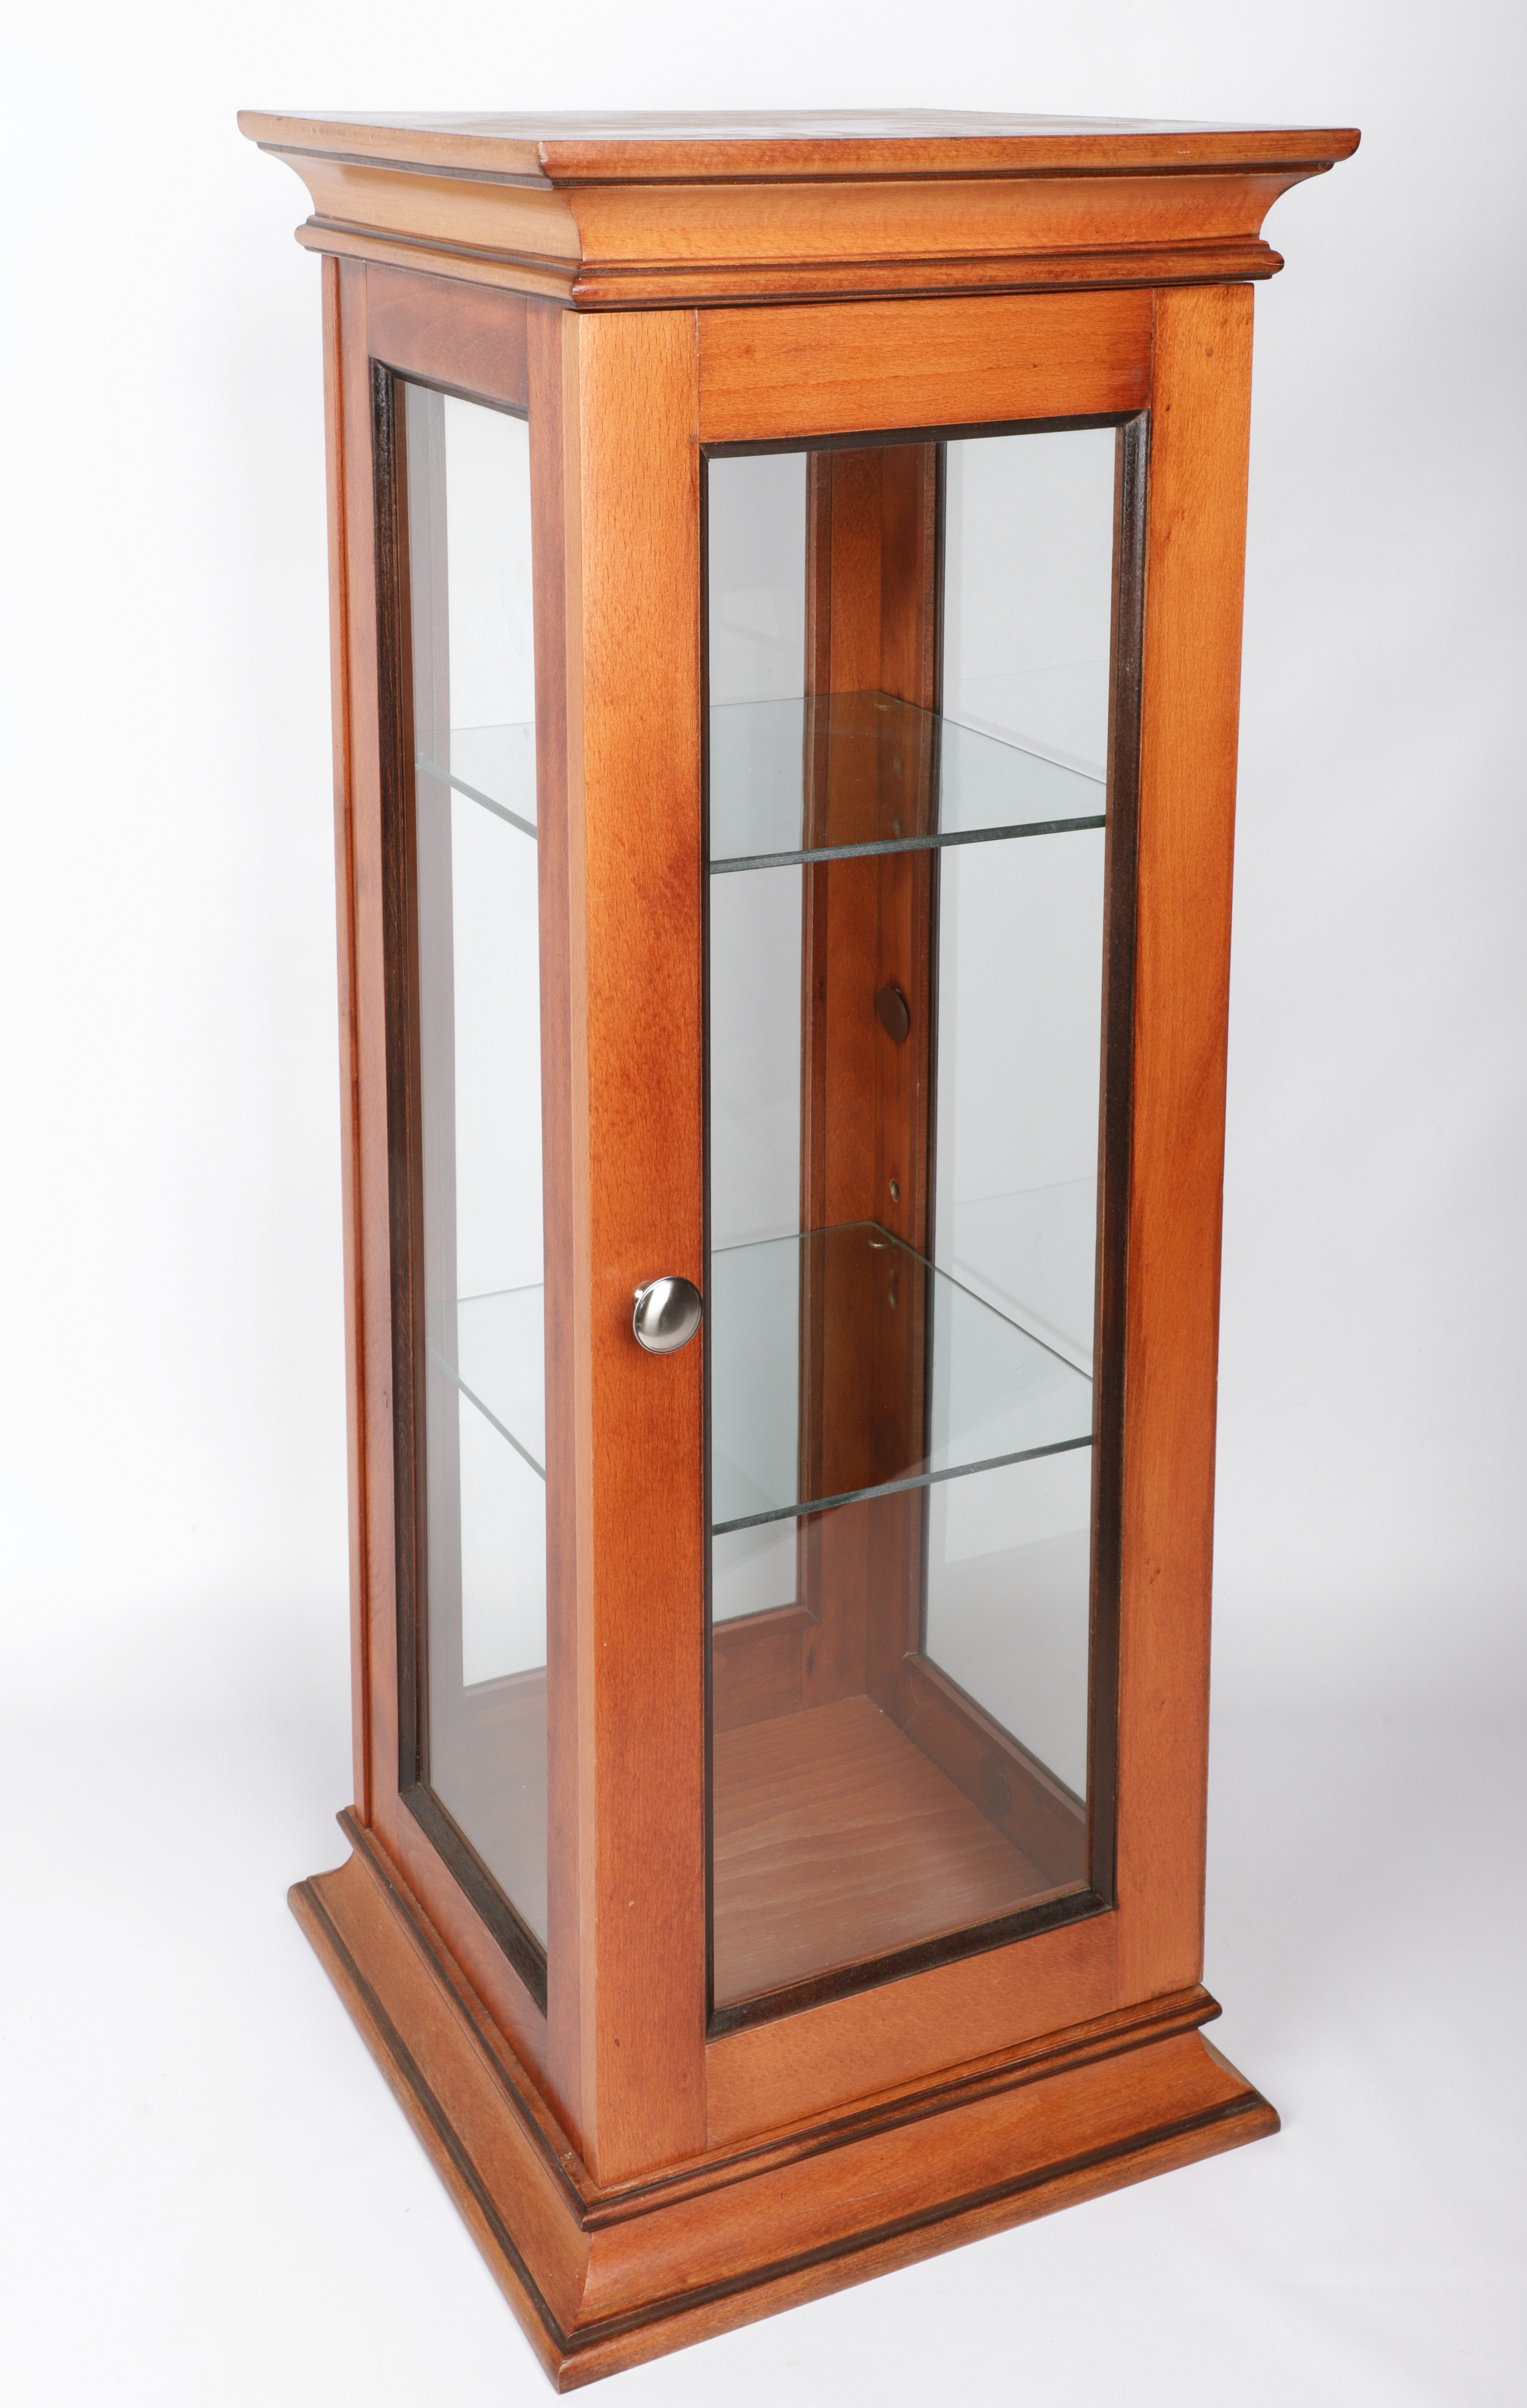 Wood & glass tabletop display cabinet,